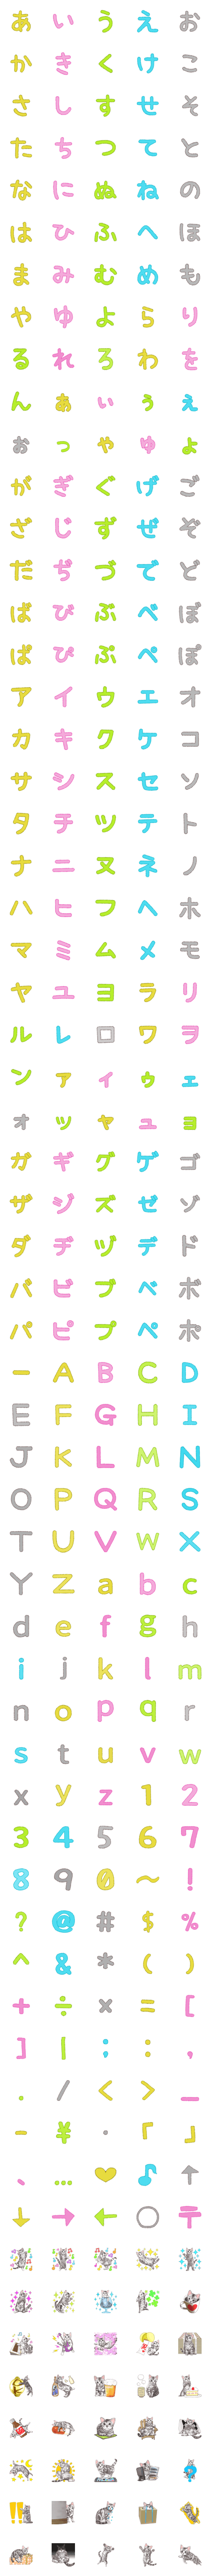 [LINE絵文字]アメショ 絵文字 2の画像一覧